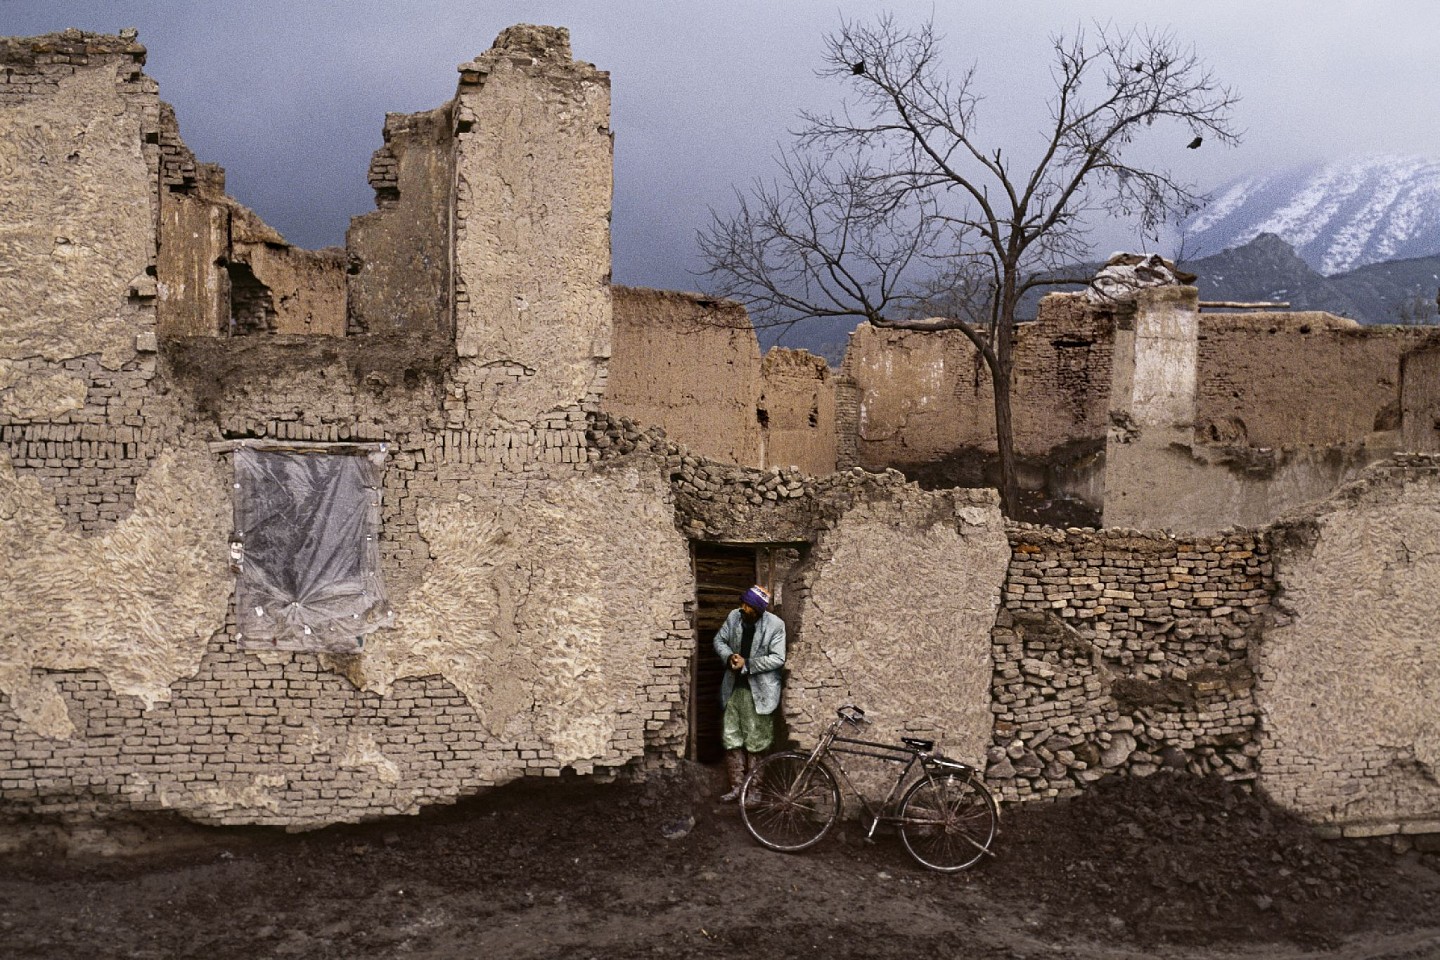 Steve McCurry, Man and Bike in Doorway, 2002
FujiFlex Crystal Archive Print
Price/Size on request